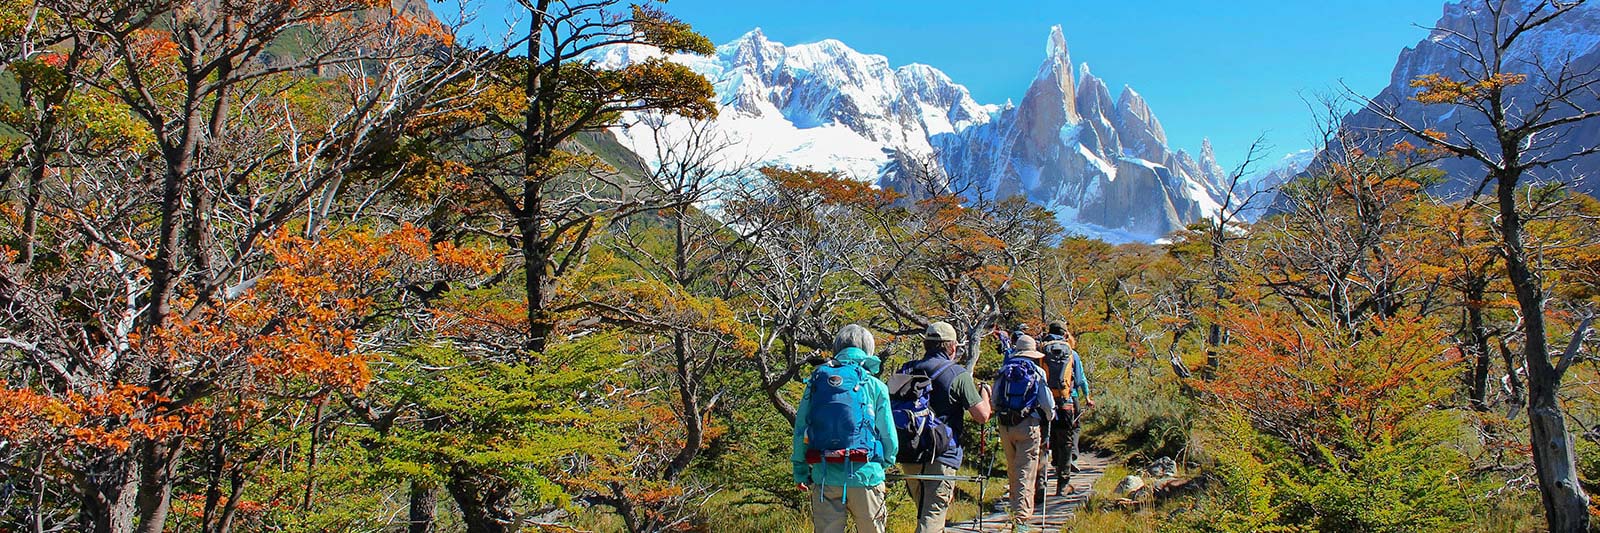 Hikers on a trail in Patagonia.